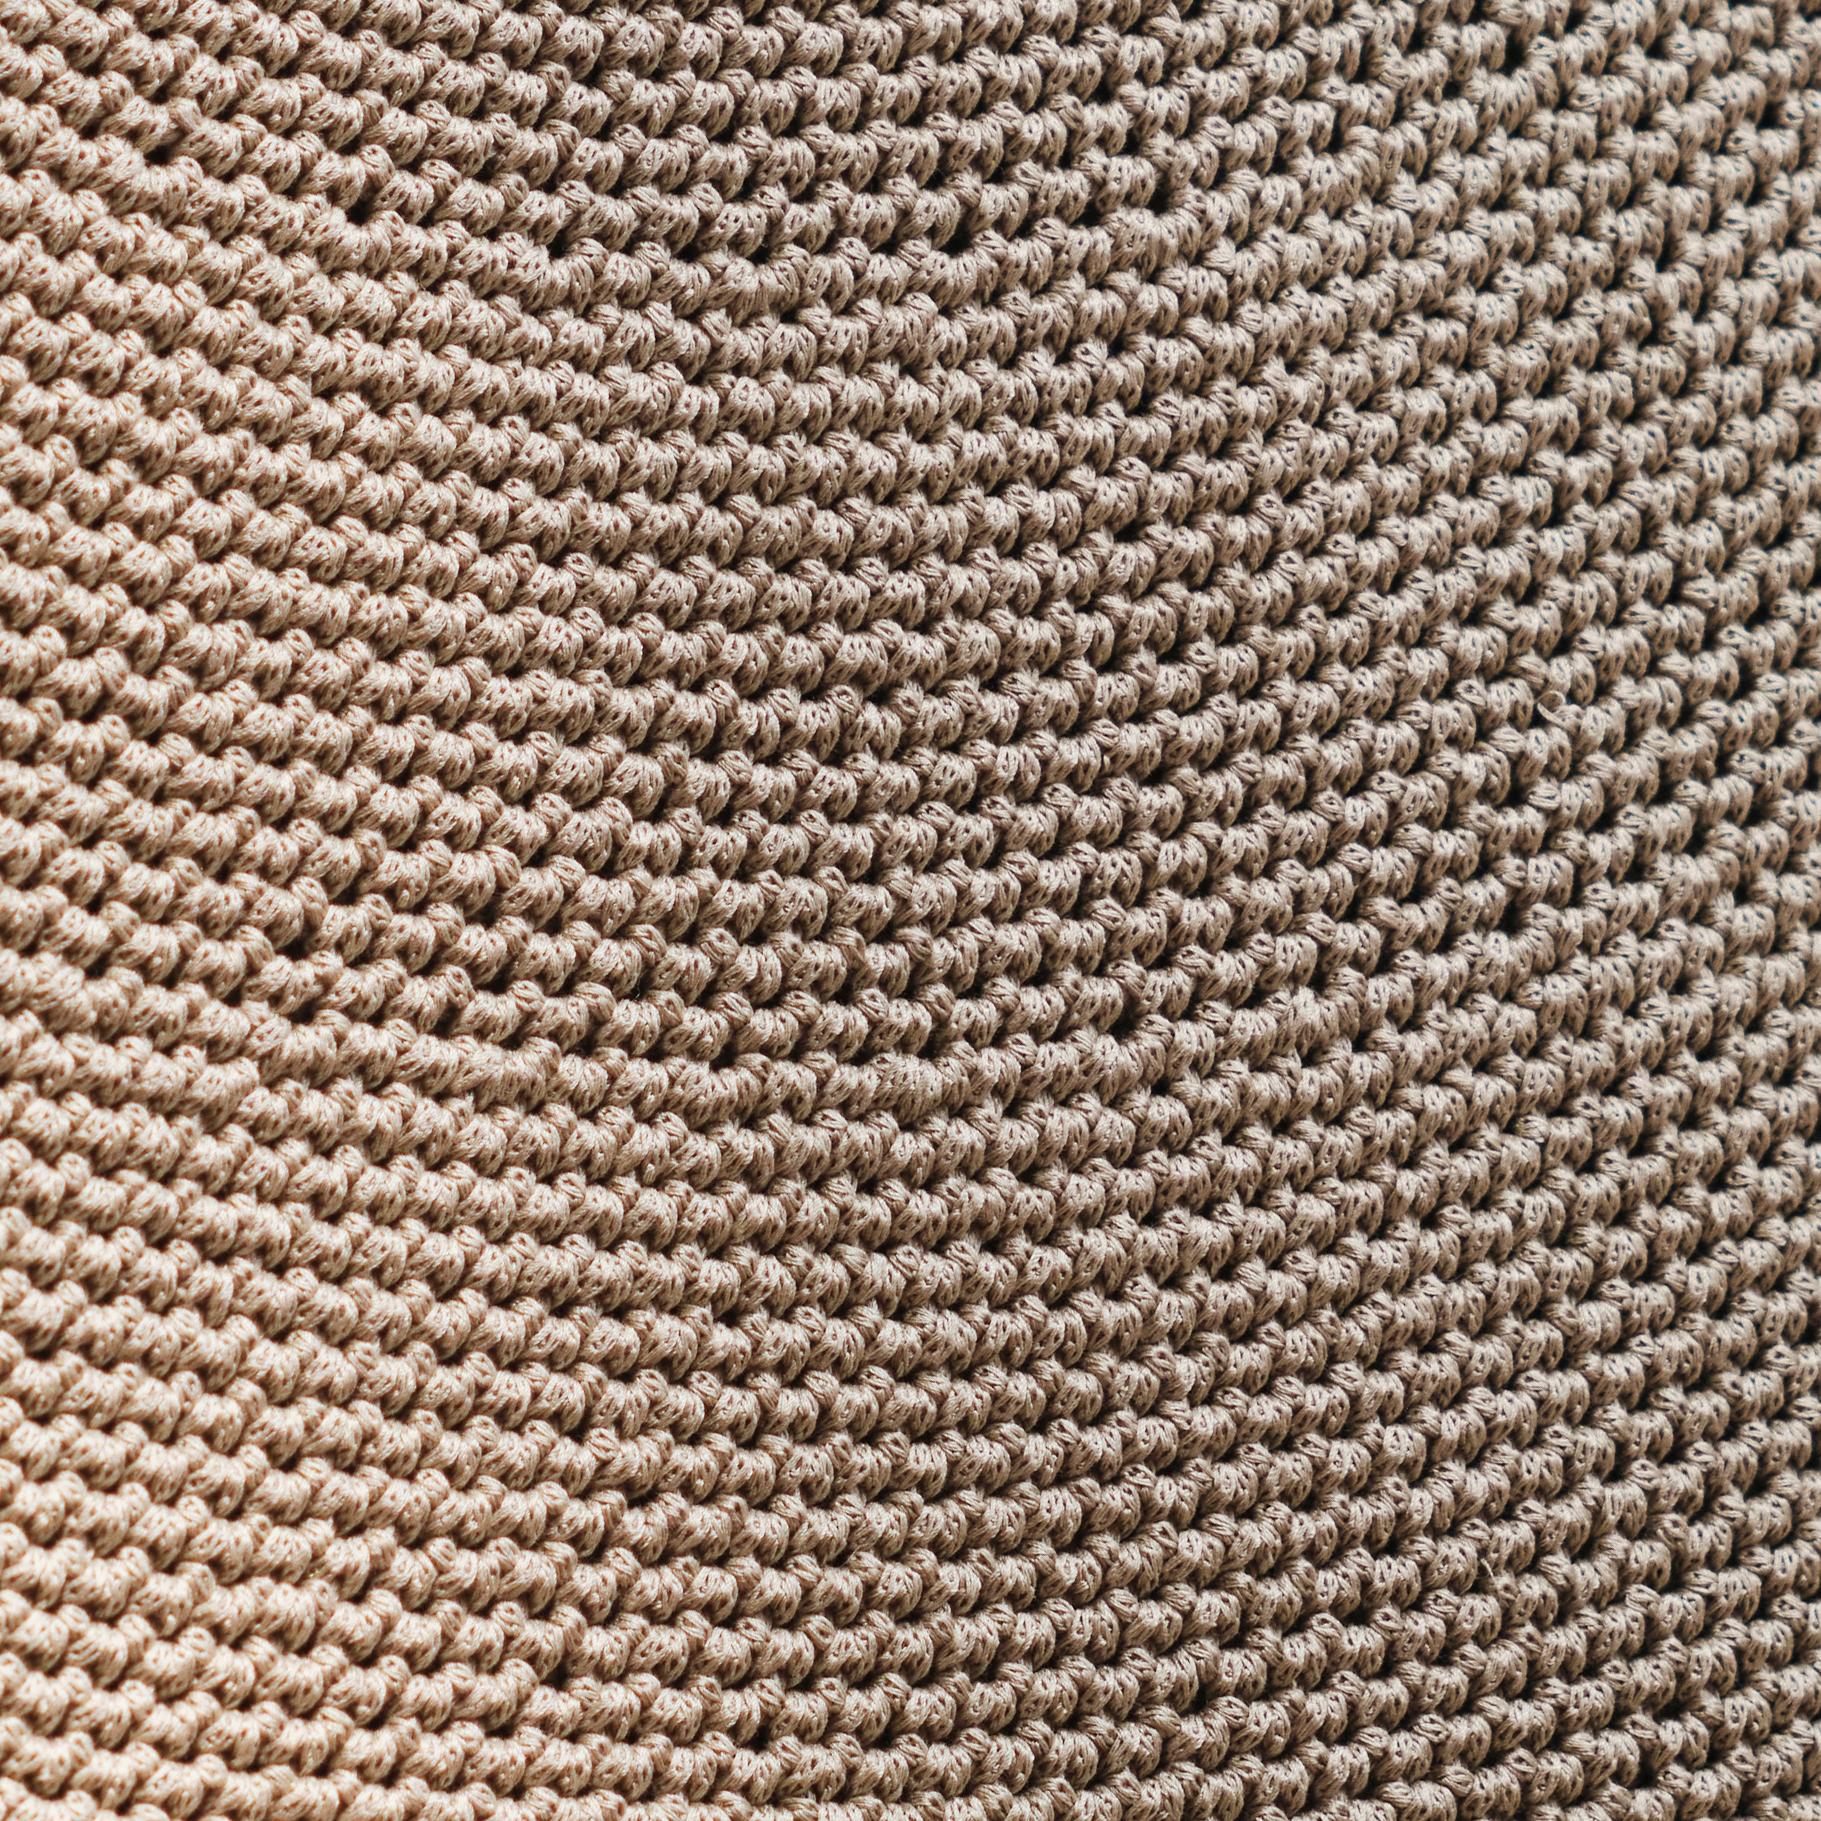 British SS03 Pendant Light Ø50cm/19in, Hand Crocheted in 100% Egyptian Cotton For Sale